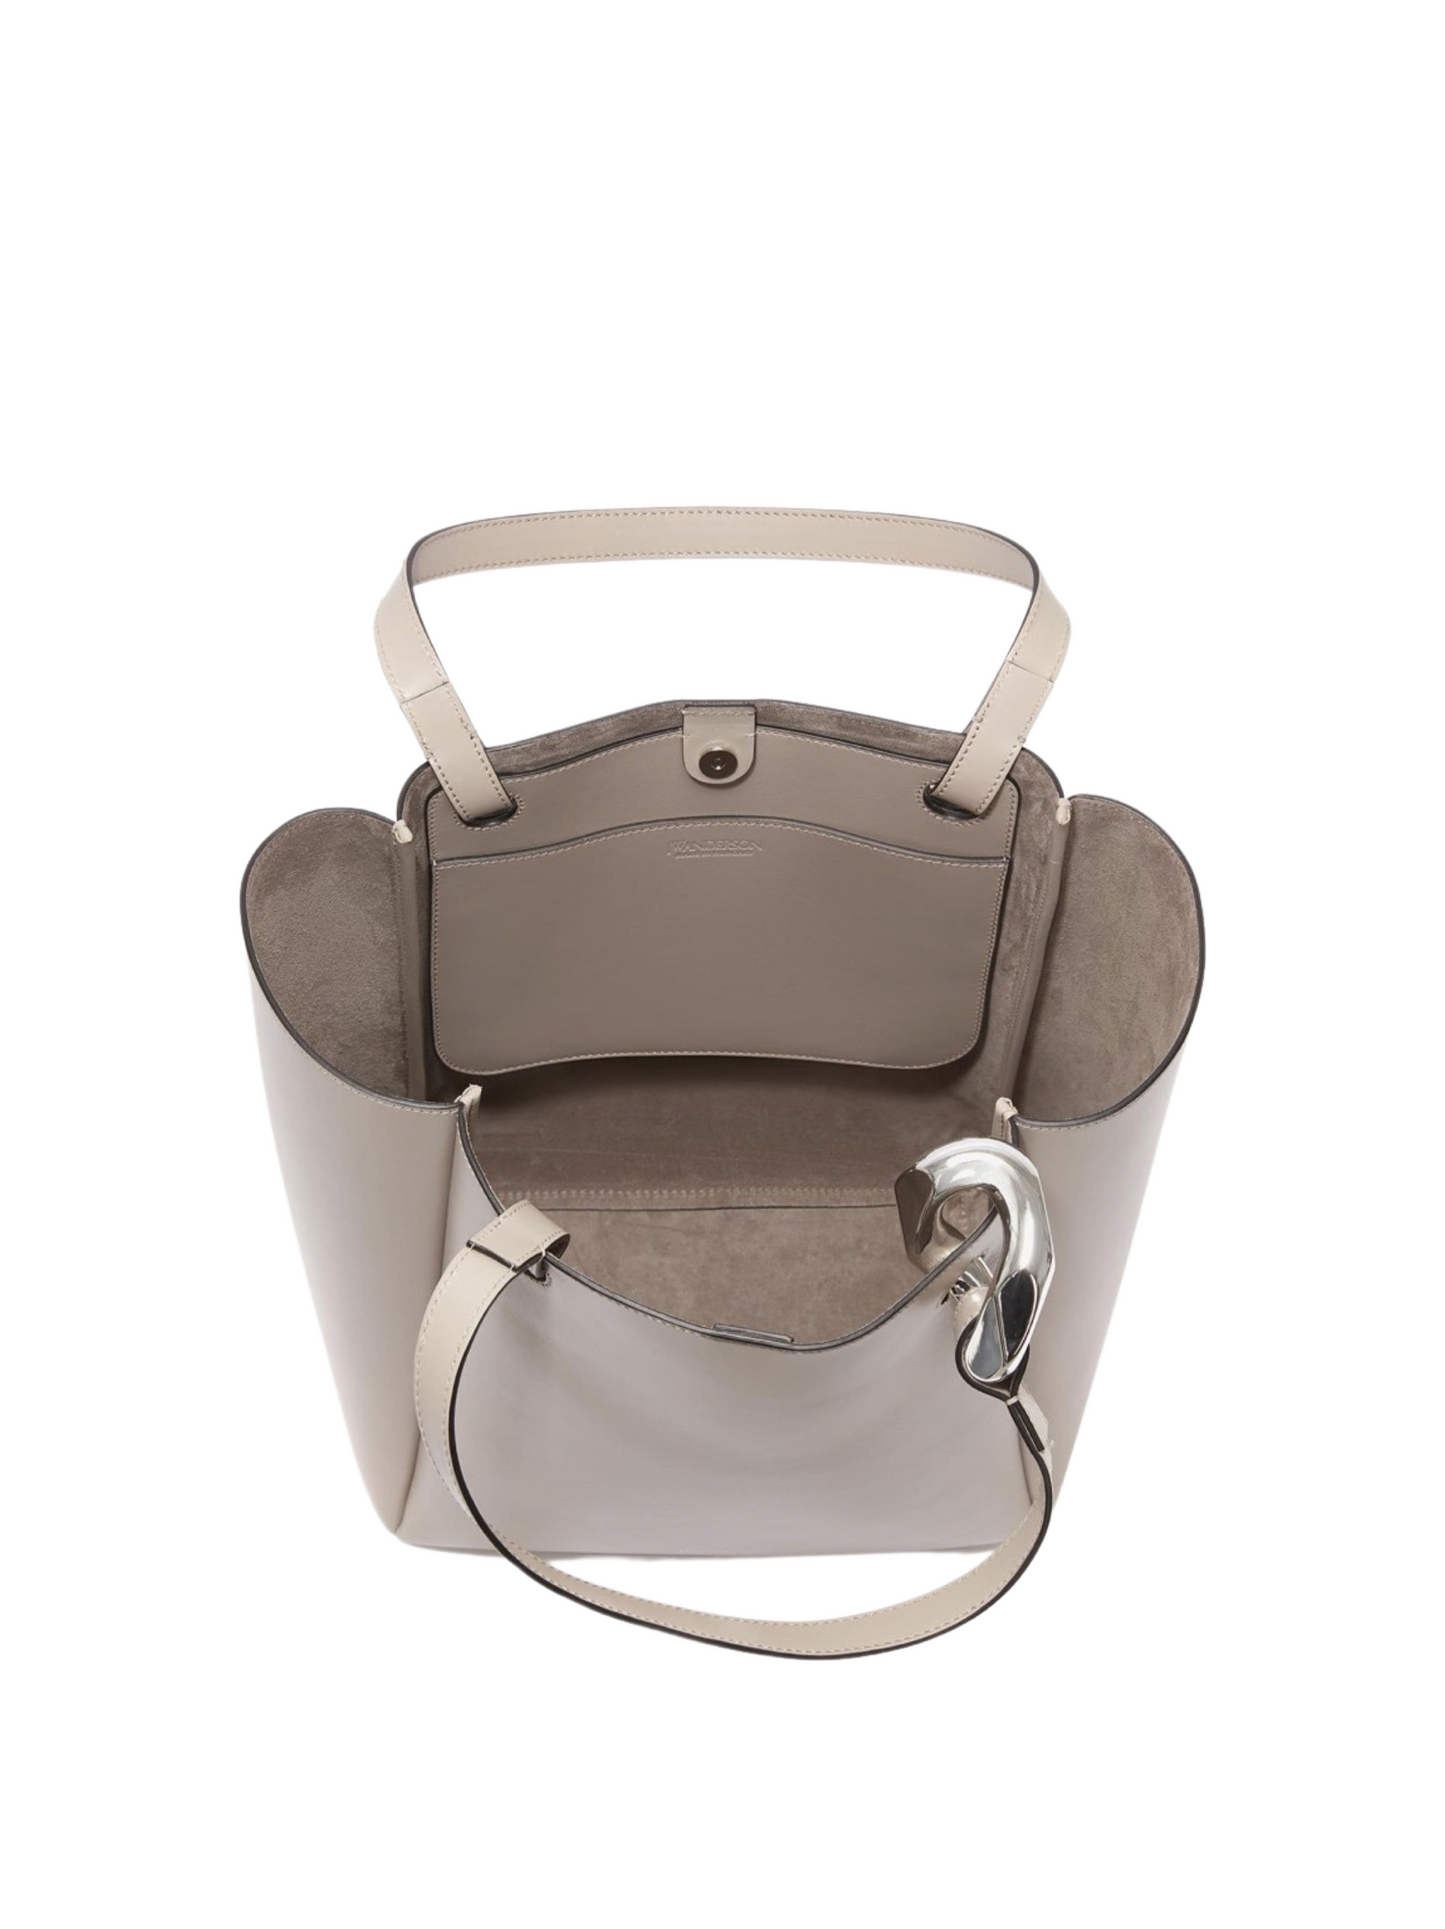 JW Anderson The JWA Corner Tote in Taupe